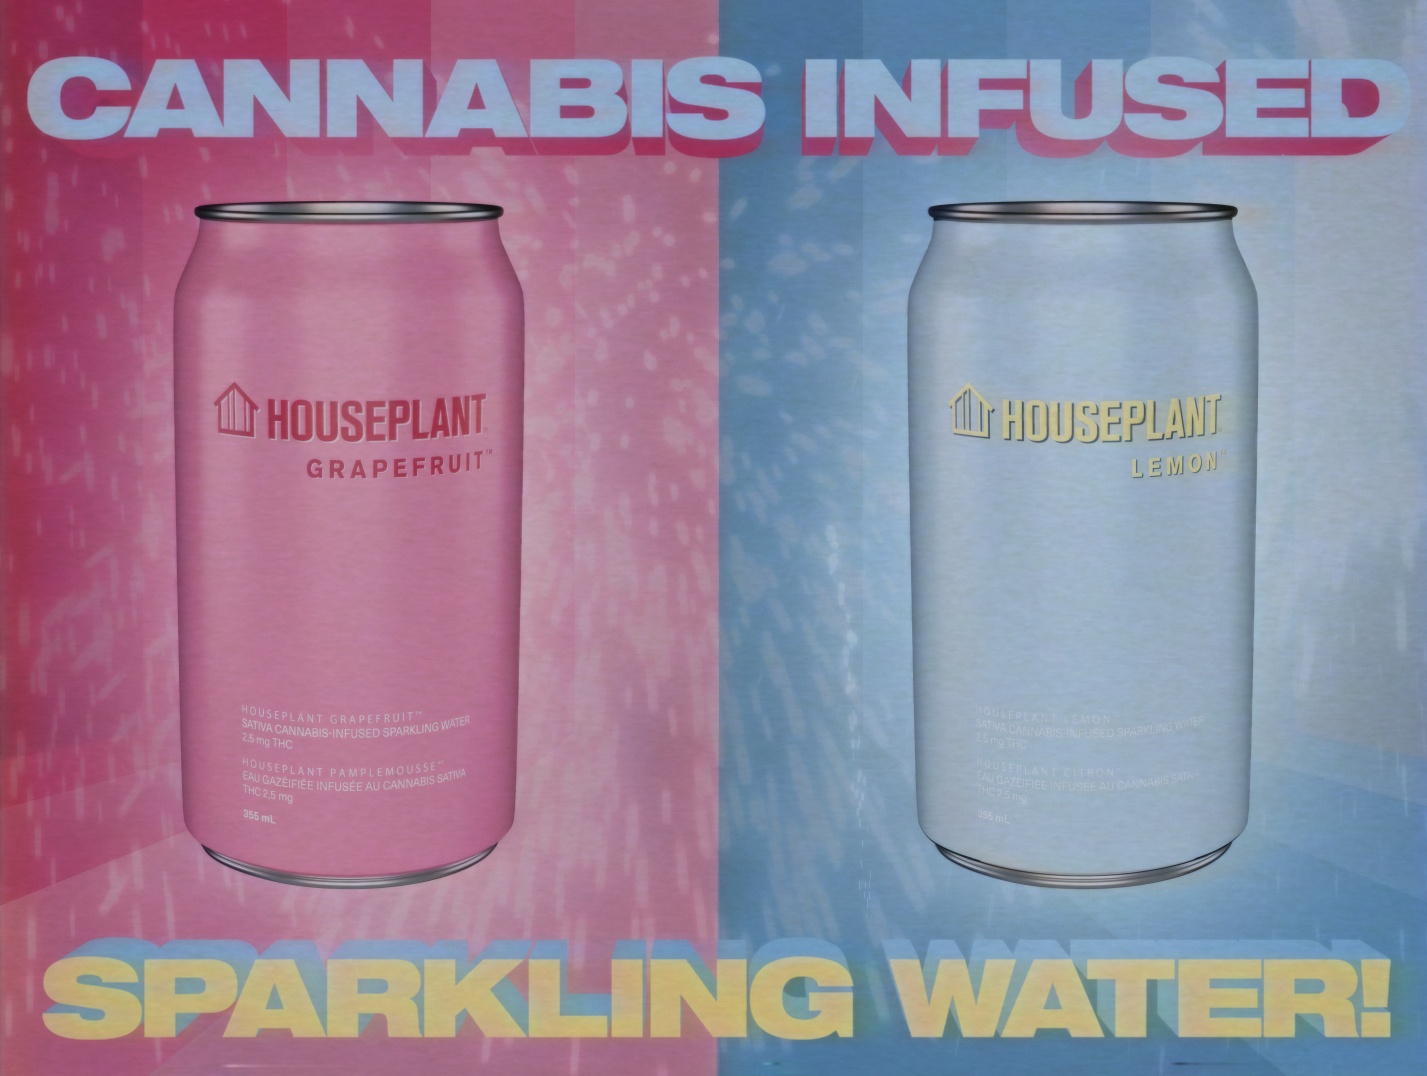 Seth Rogen's Houseplant Launches THC Beverages In Canada